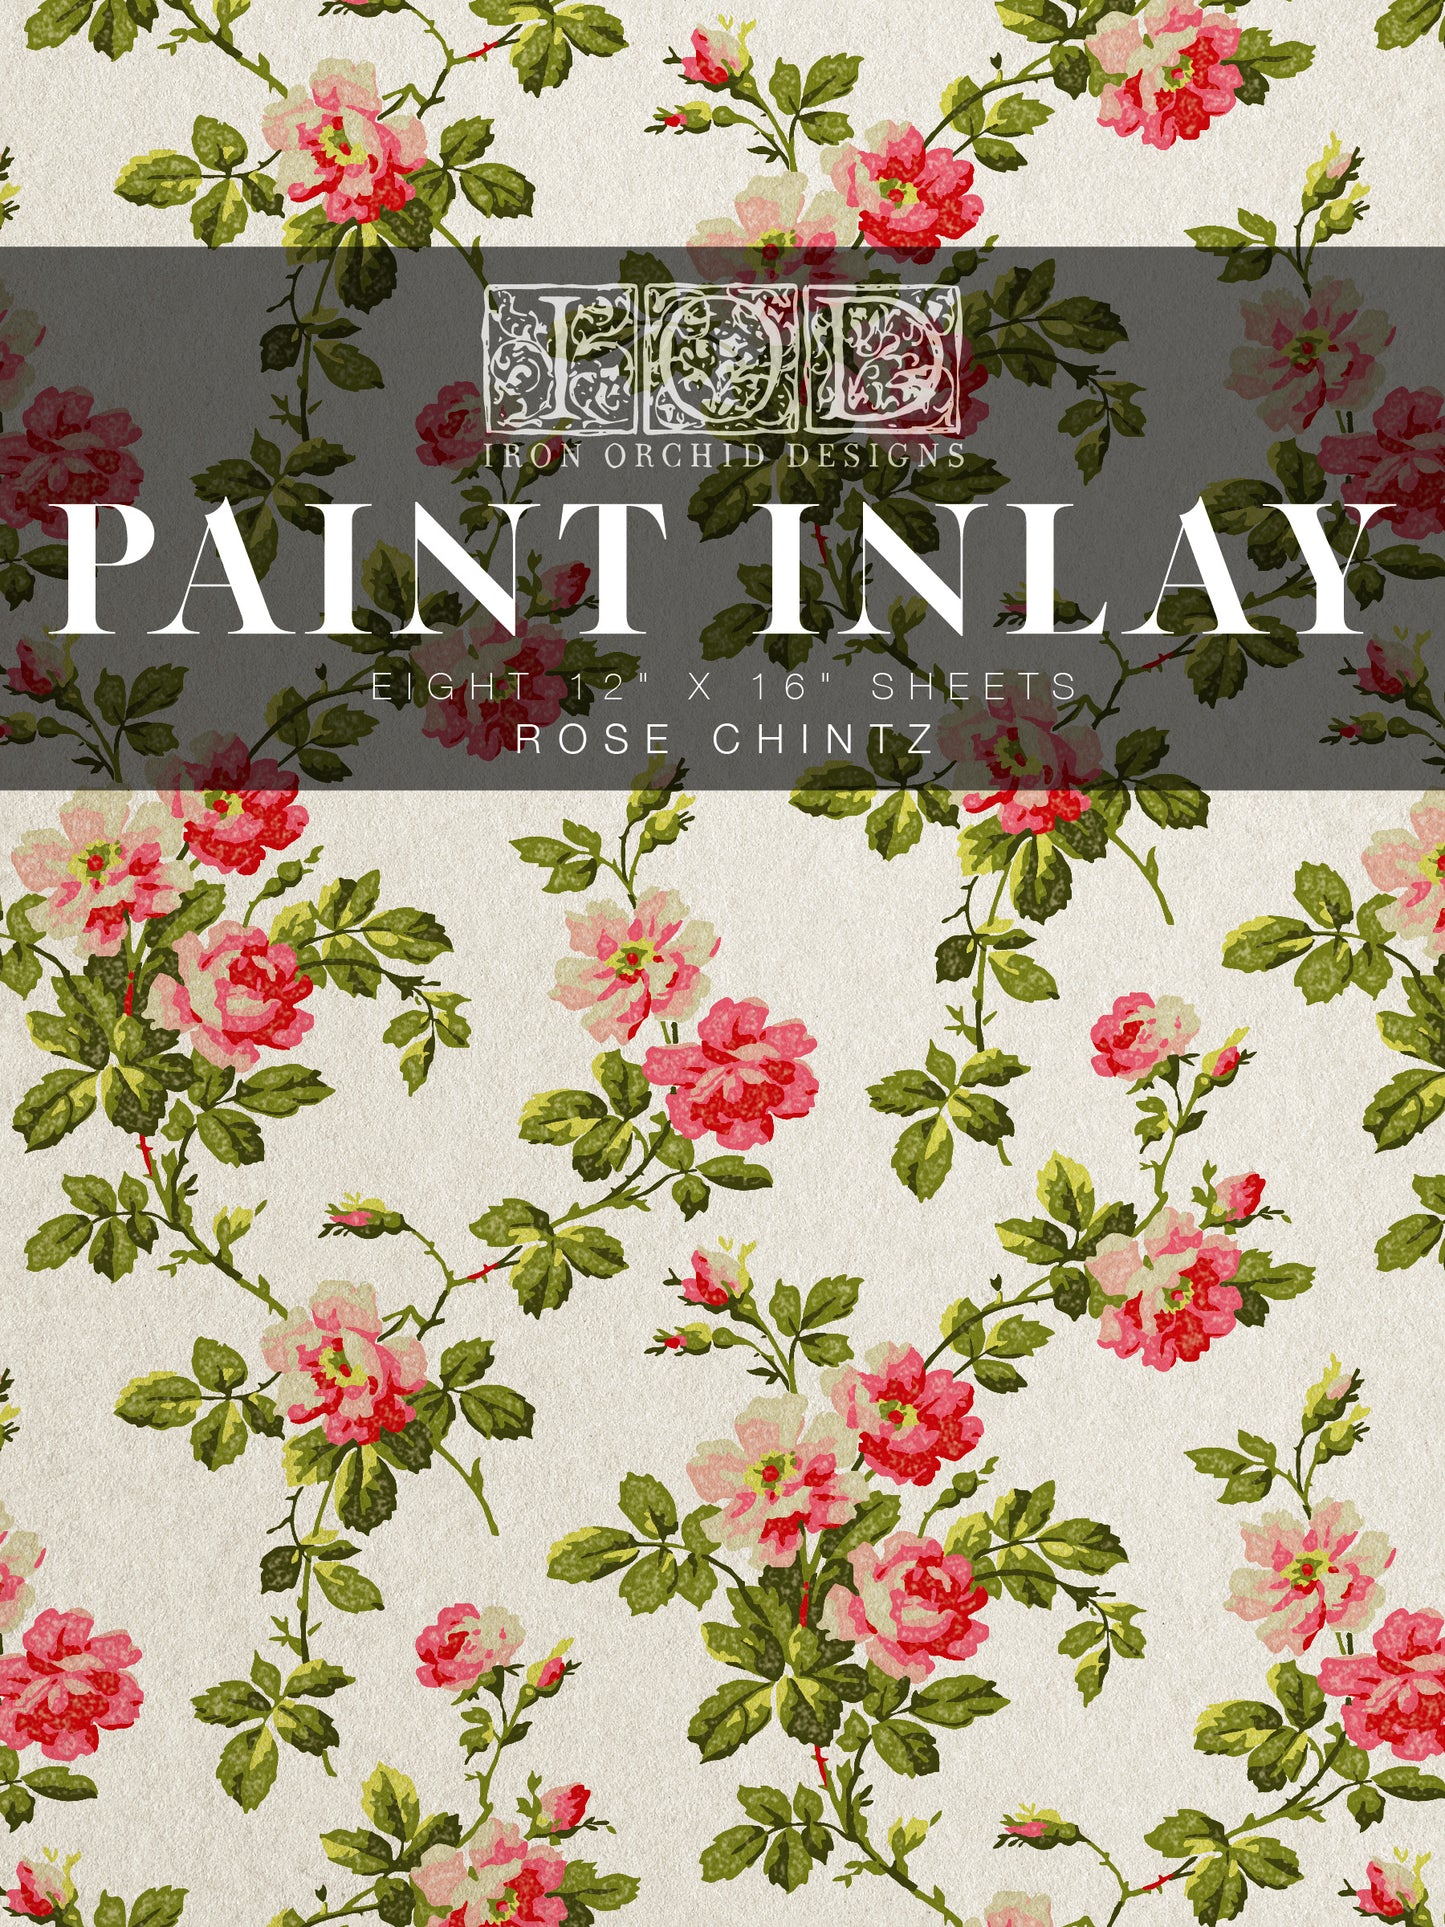 Iron Orchid Designs Rose Chintz | IOD Paint Inlay *